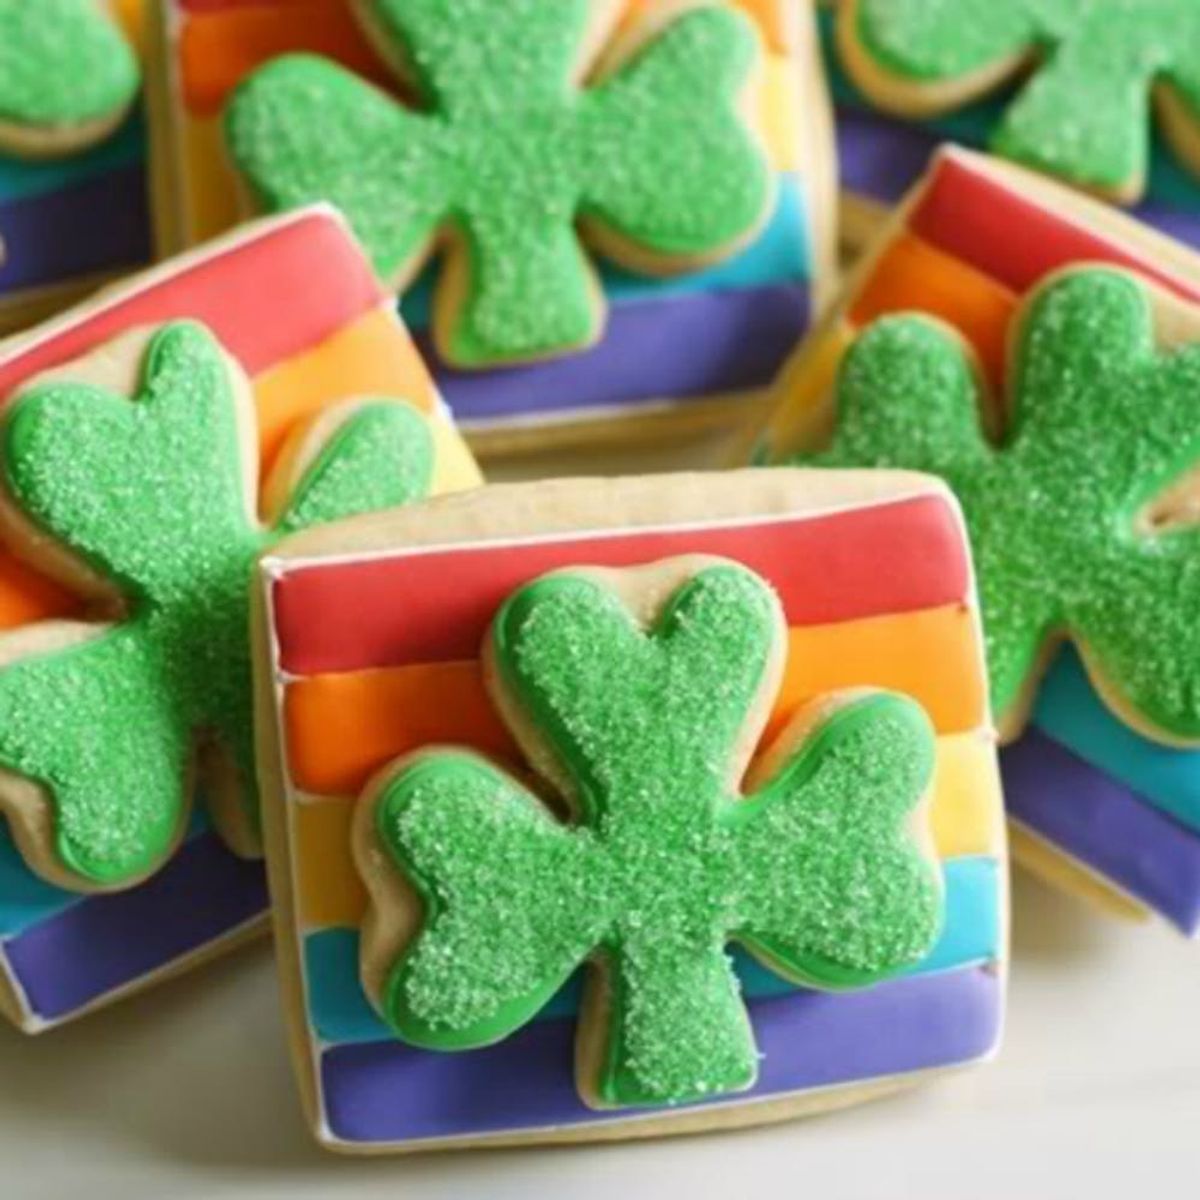 St. Patrick’s Day Cookie Recipes and Other Sweet Treats